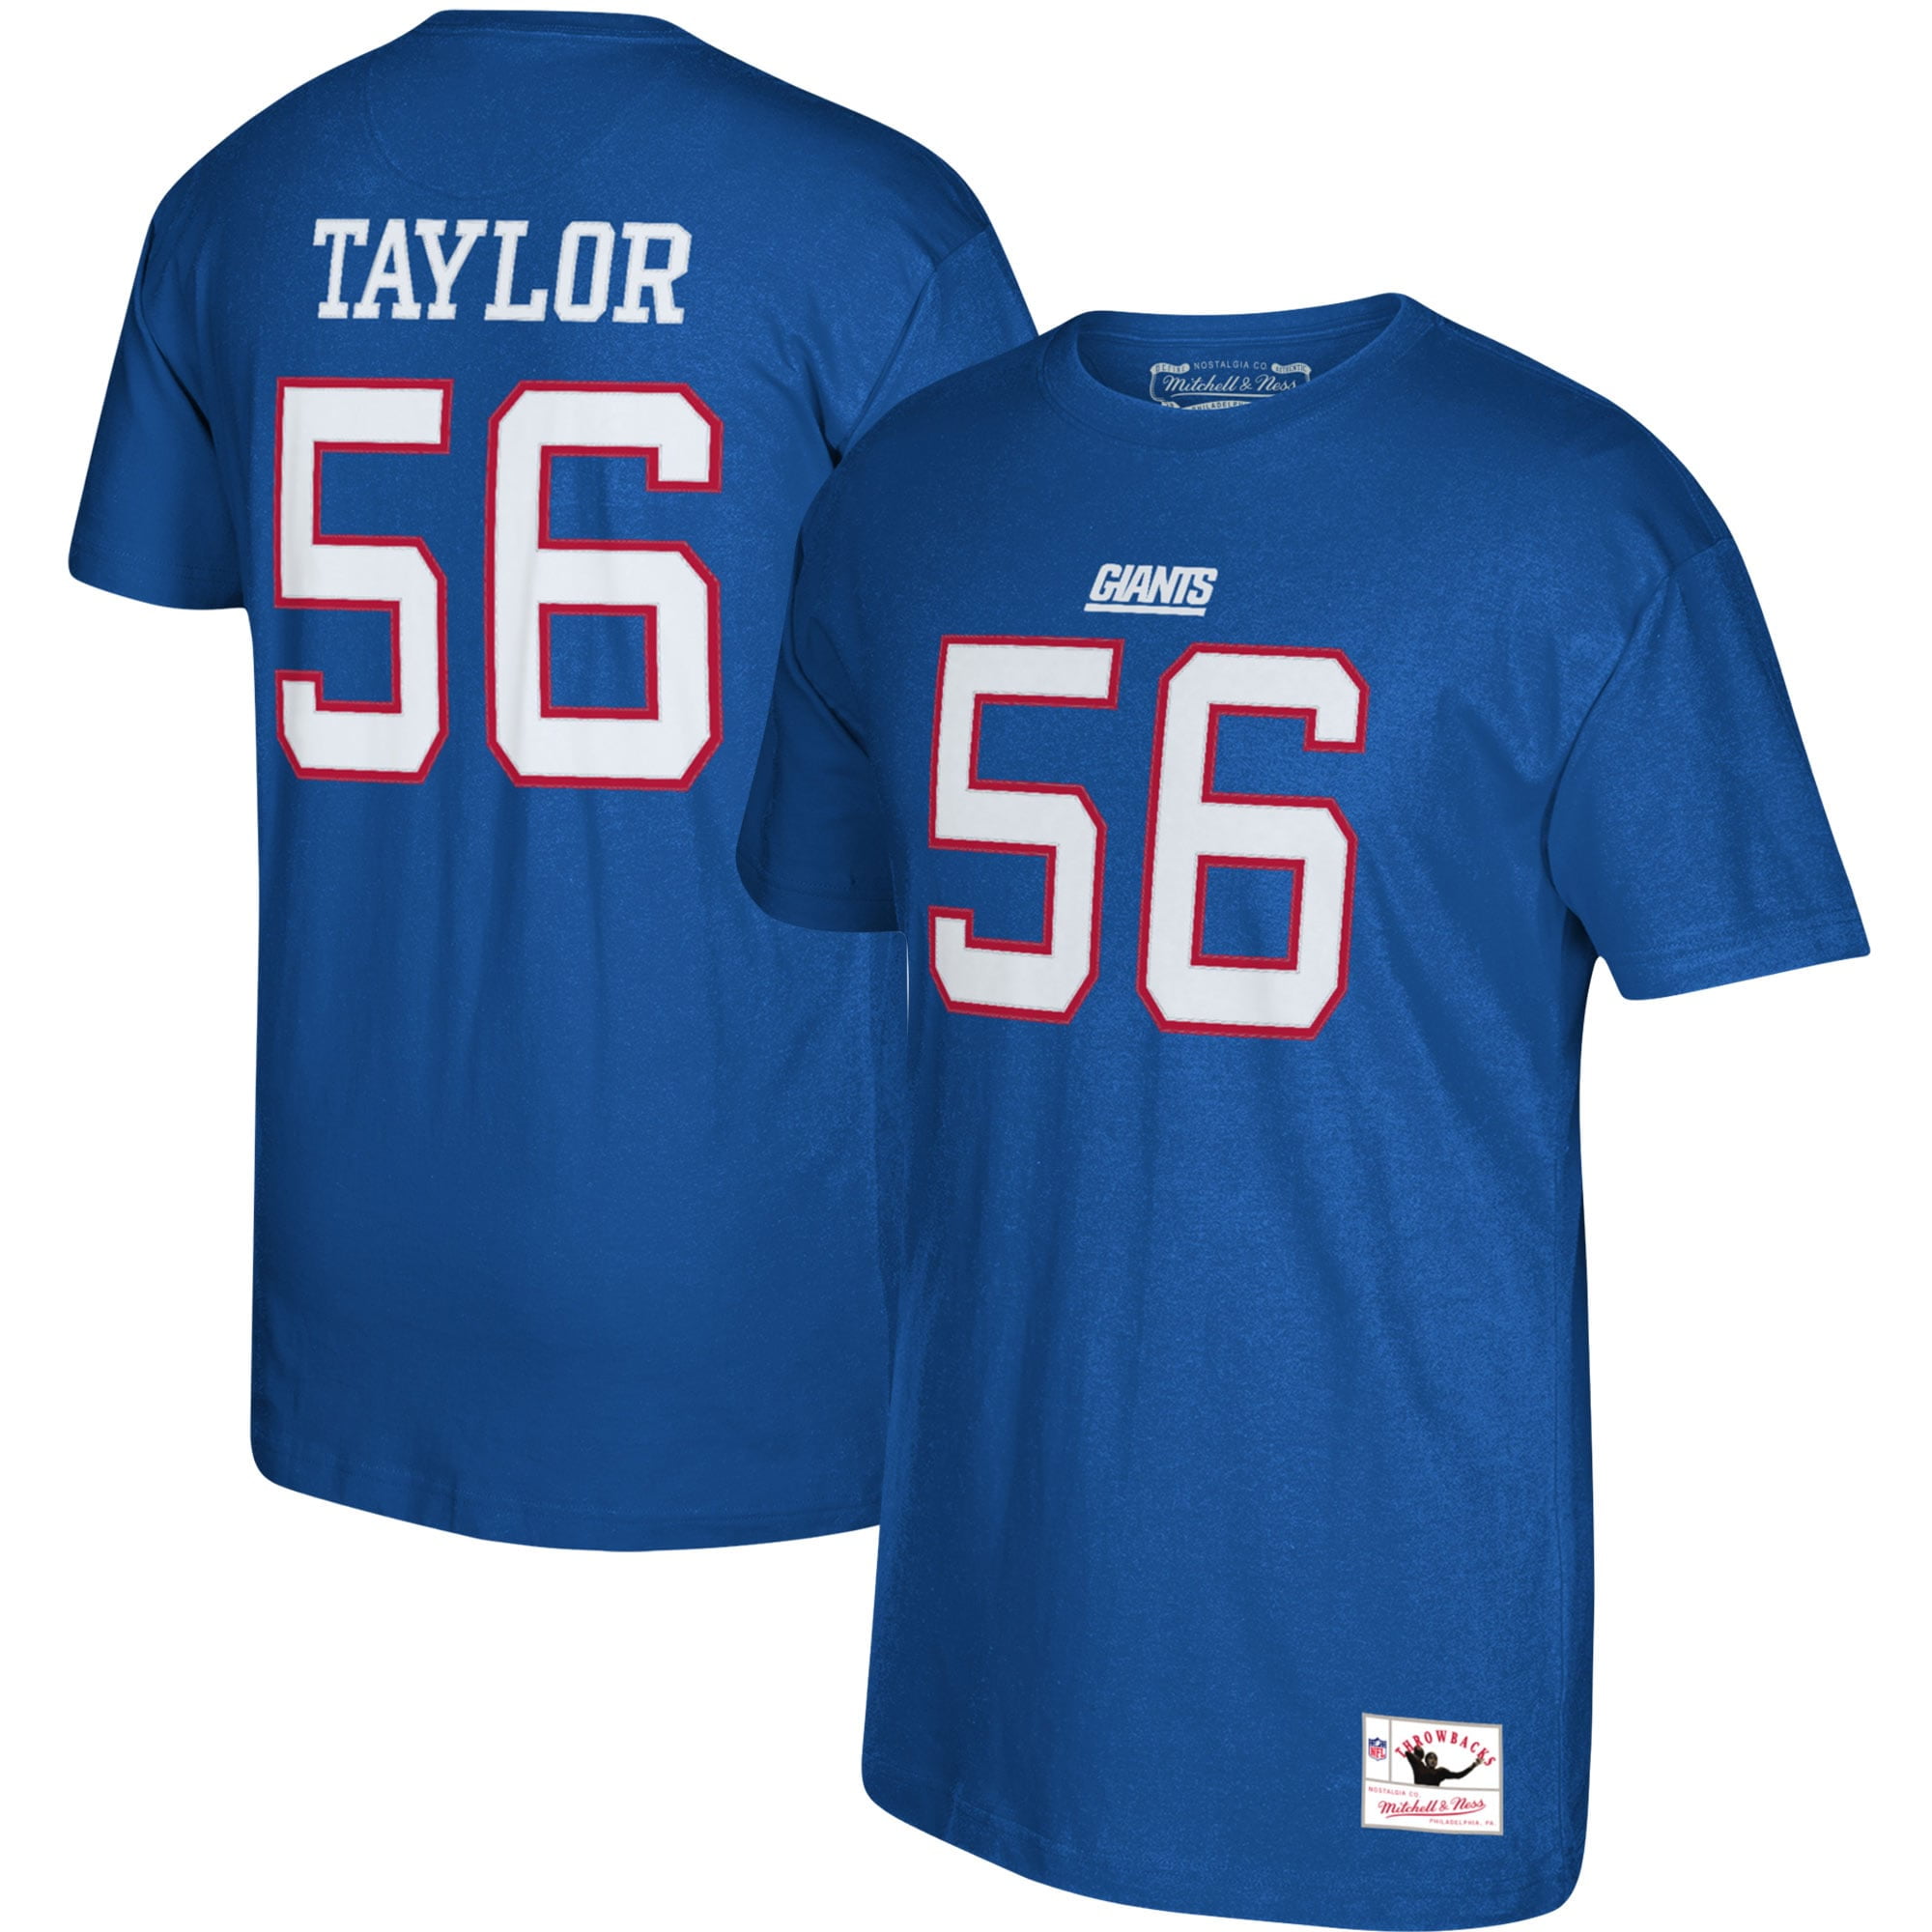 lawrence taylor mitchell and ness